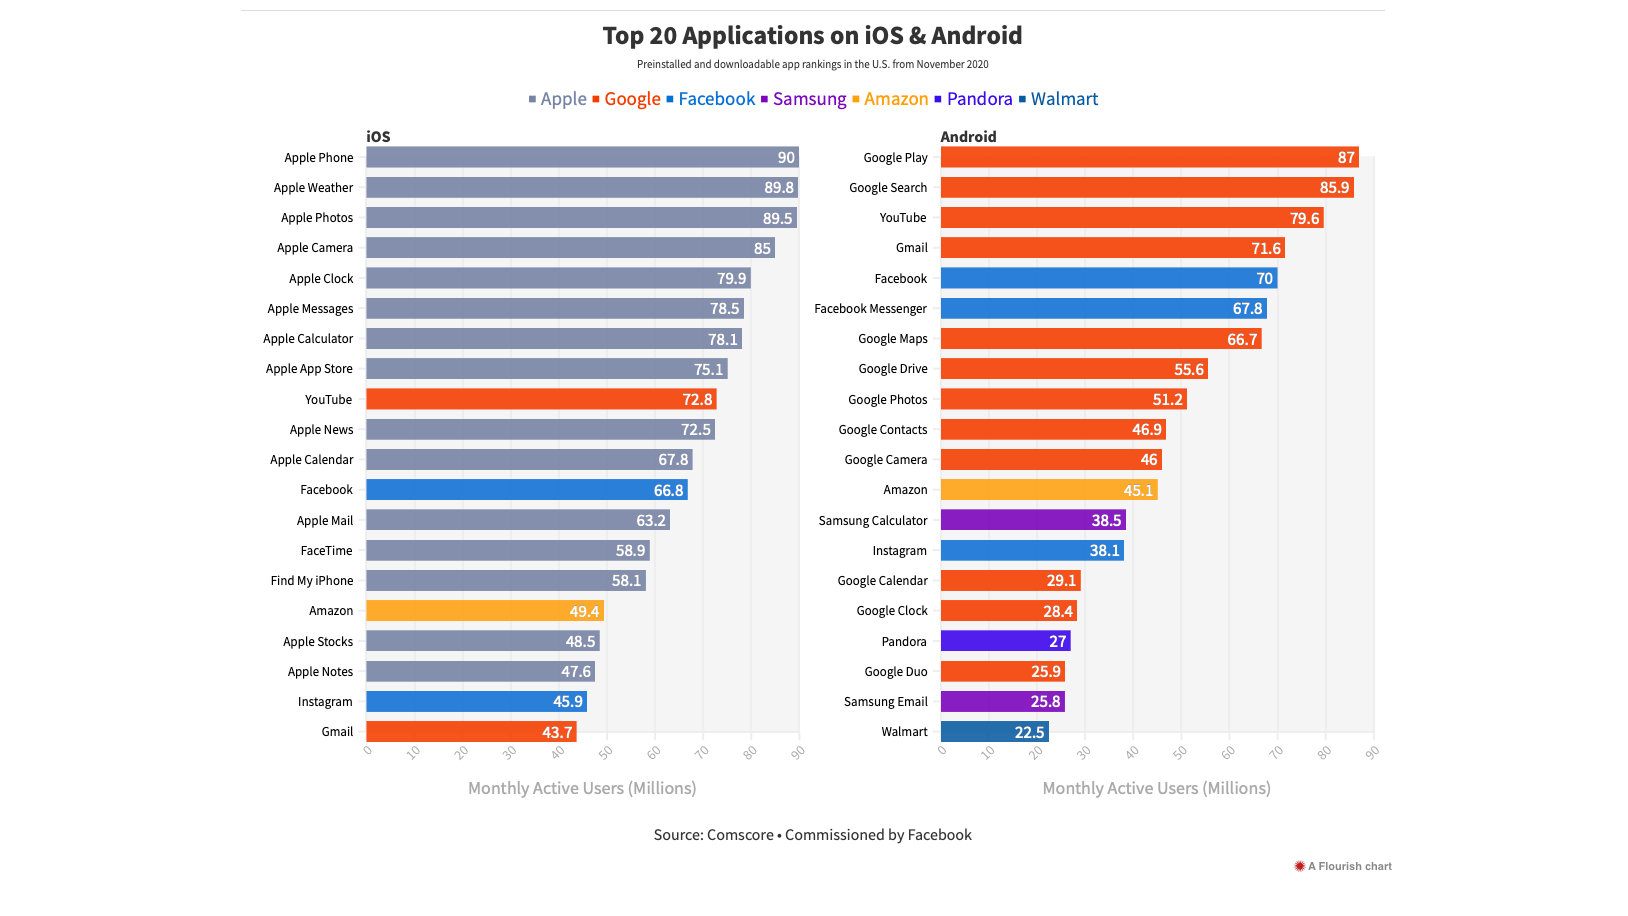 Top 20 Applications on iOS &amp; Android. Pre-installed and downloadable app rankings in the U.S. from November 2020. Sour - Comscore (commissioned by Facebook). - Is it fair to say Apple and Google have monopolized their own app stores?